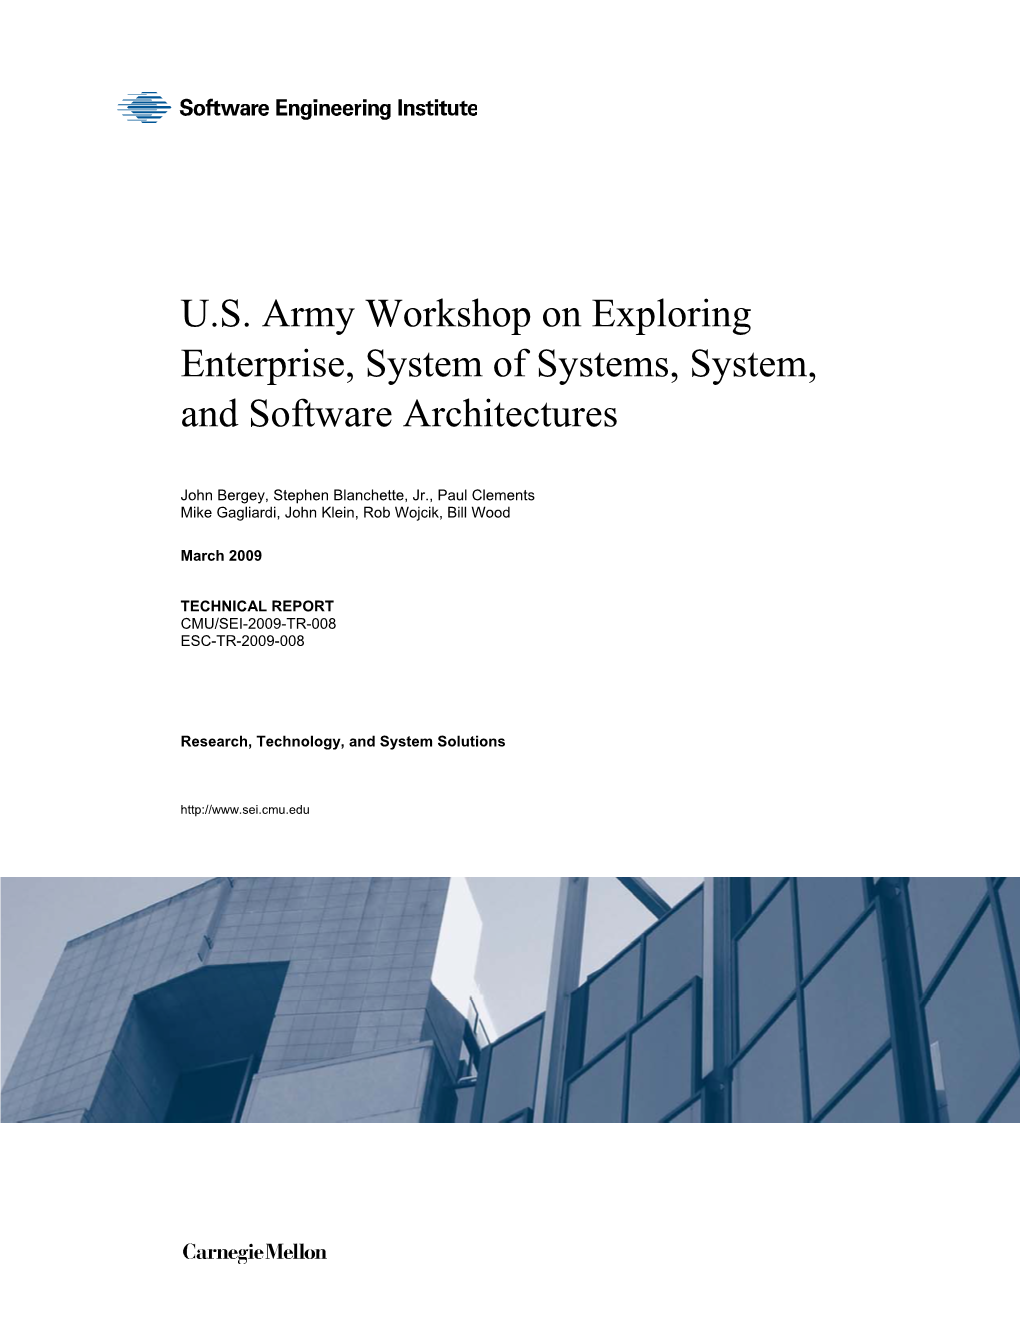 U.S. Army Workshop on Exploring Enterprise, System of Systems, System, and Software Architectures